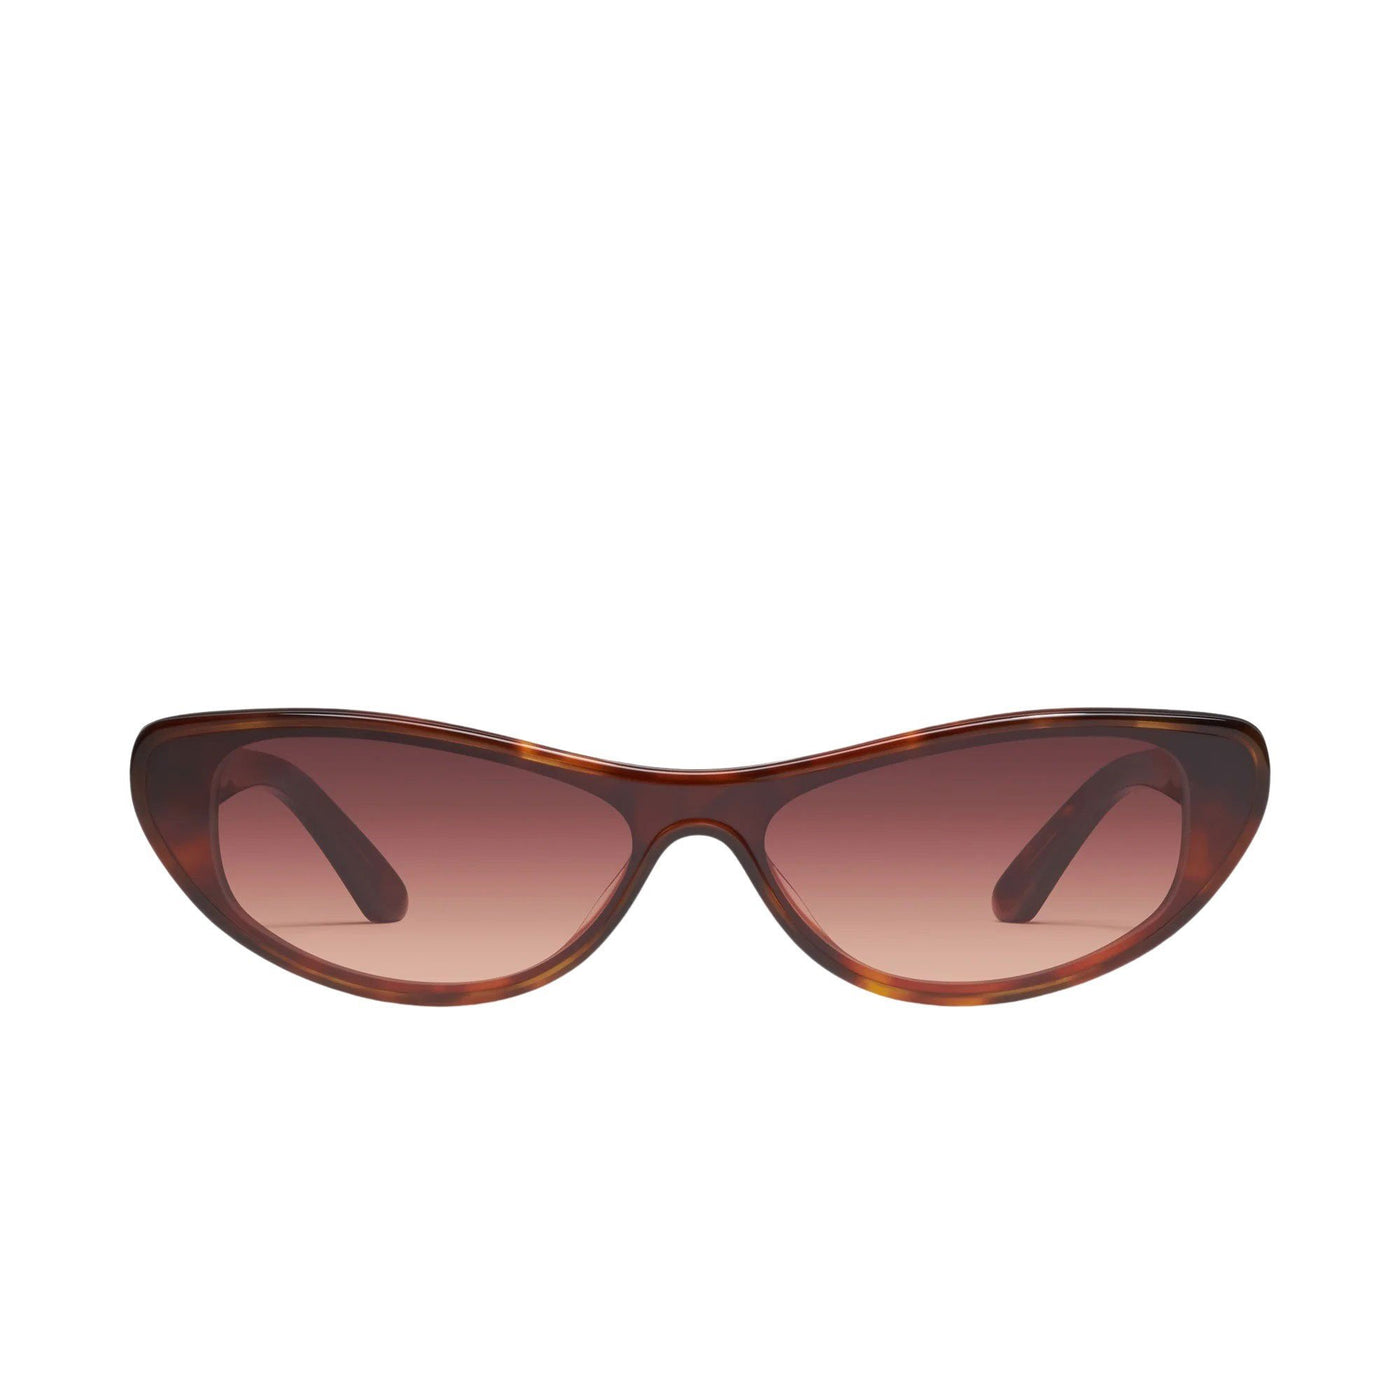 Quay Women's Slate Smooth Cat Eye Sunglasses-brown tortoise front view